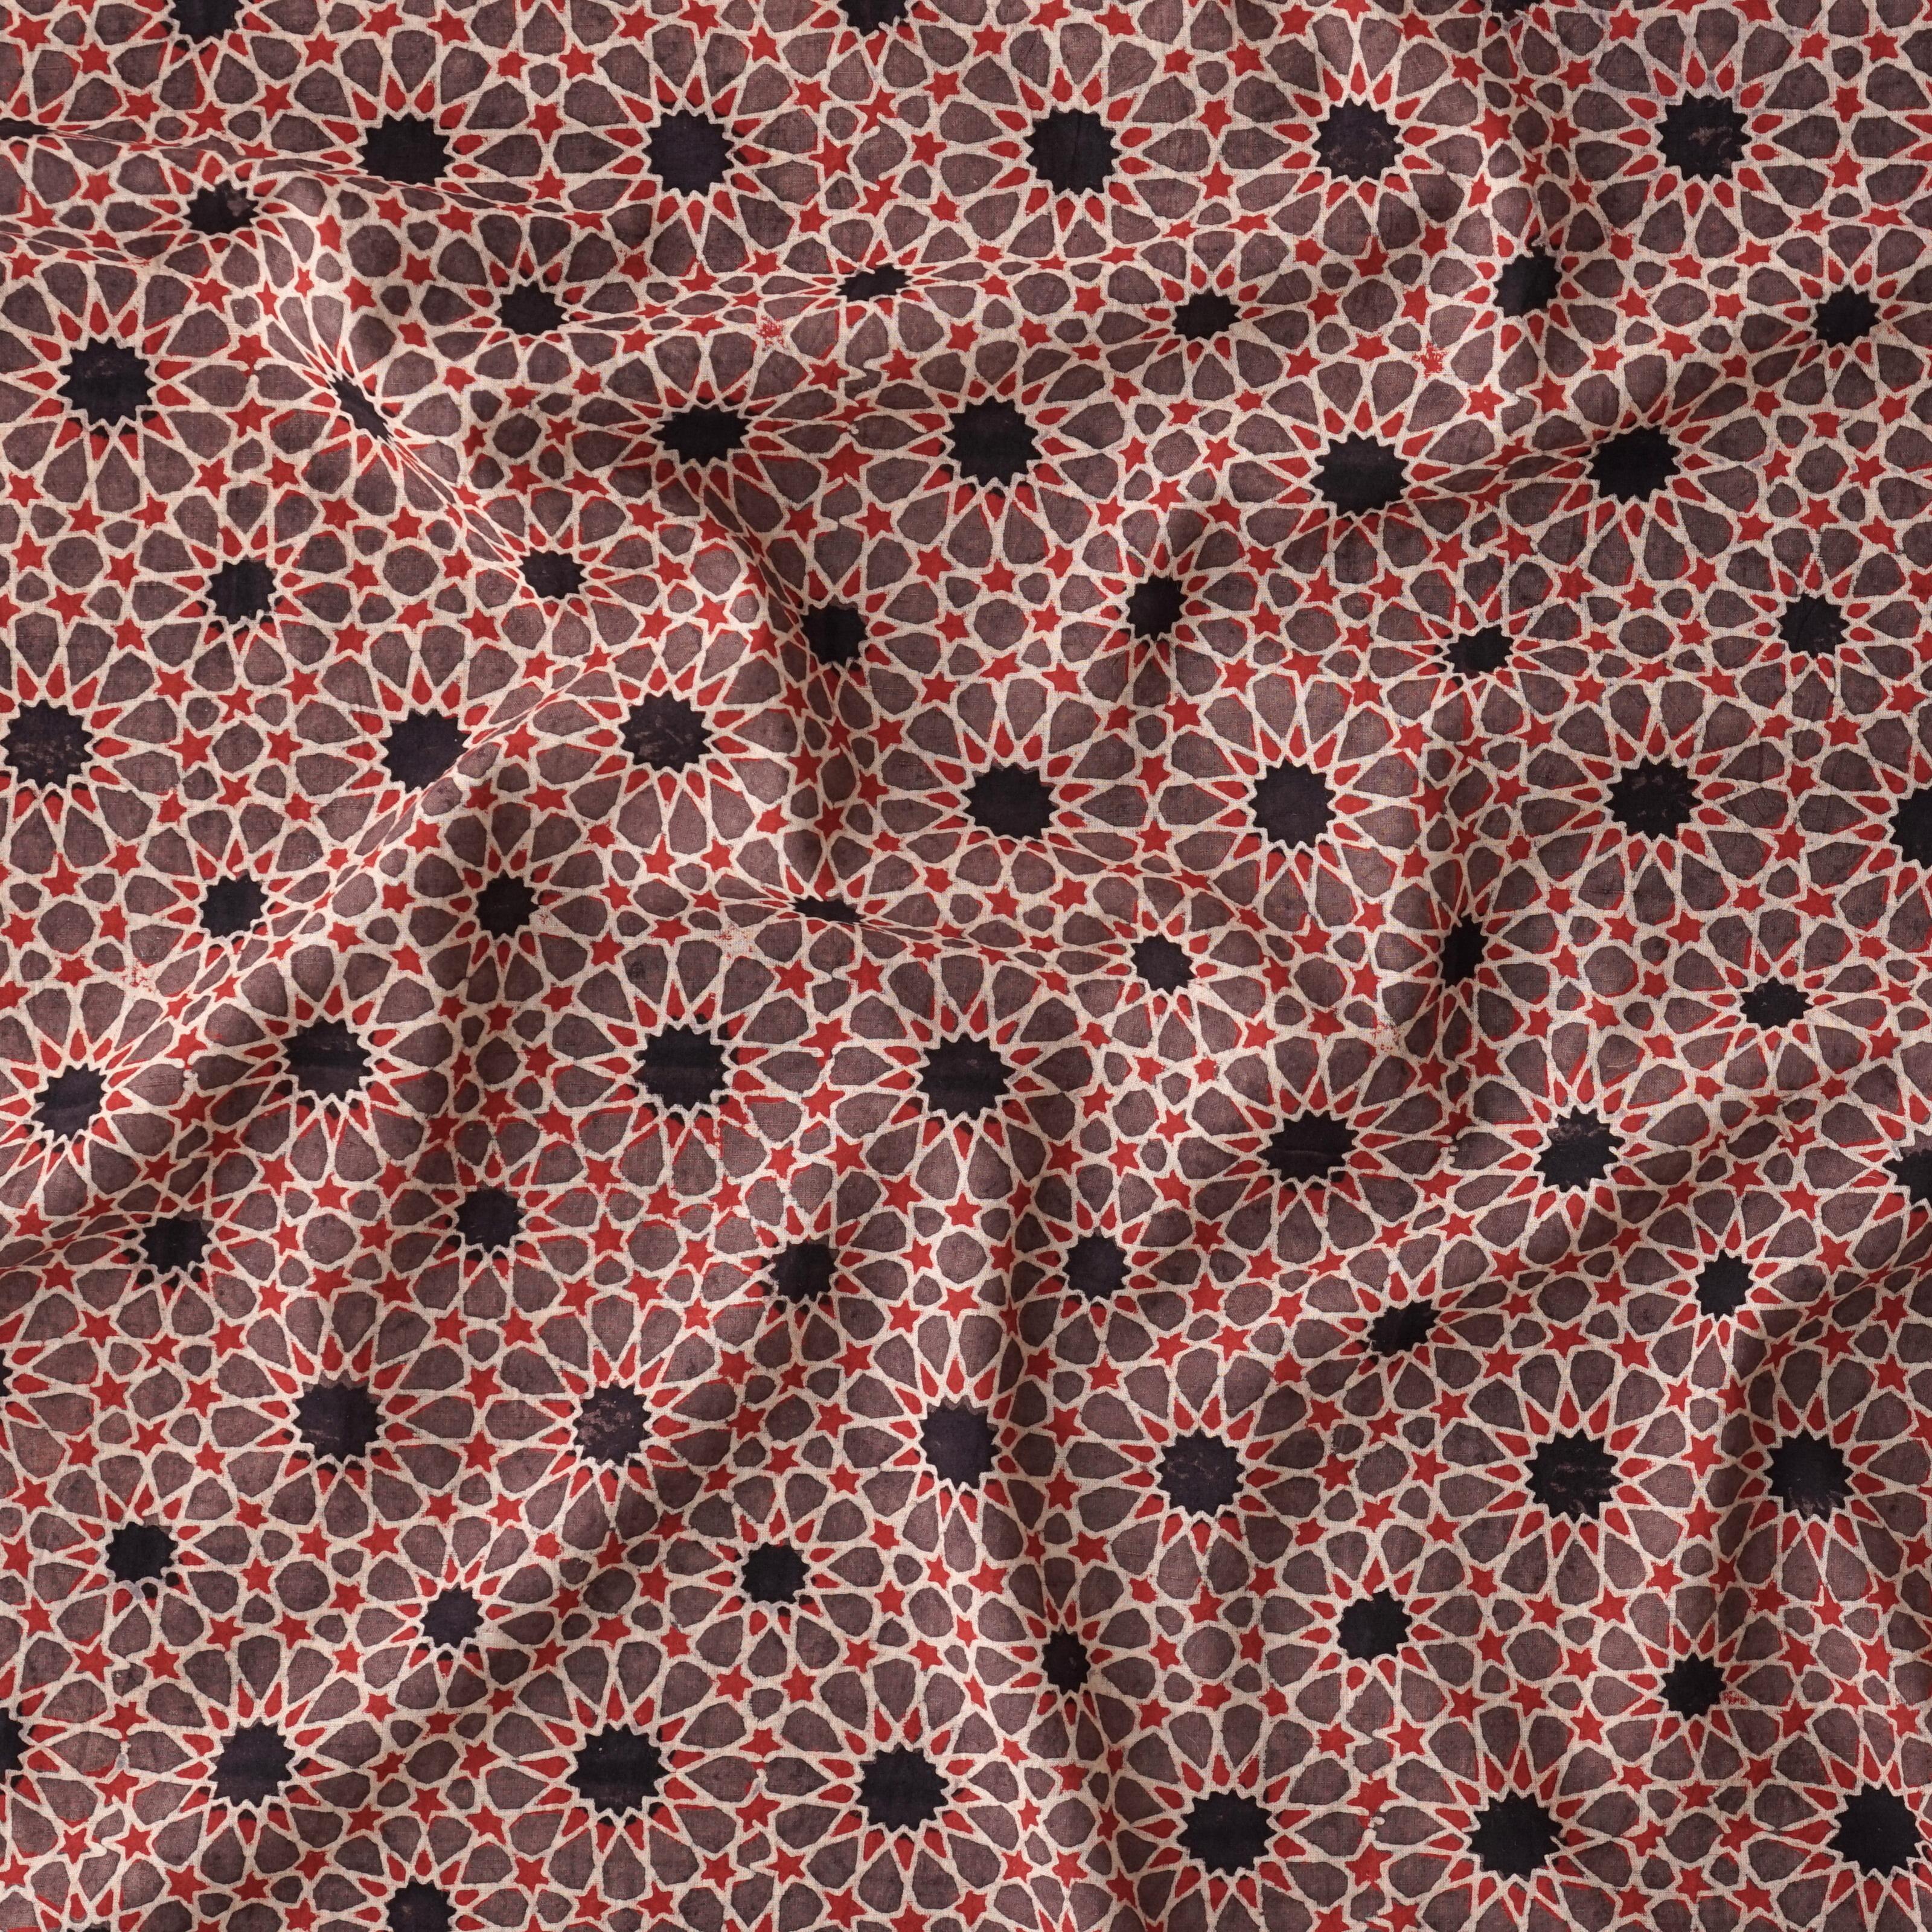 SIK12 - Block-Printed Cotton Fabric From India - Fireworks Motif - Black Iron and Red Alizarin Dye - Contrast